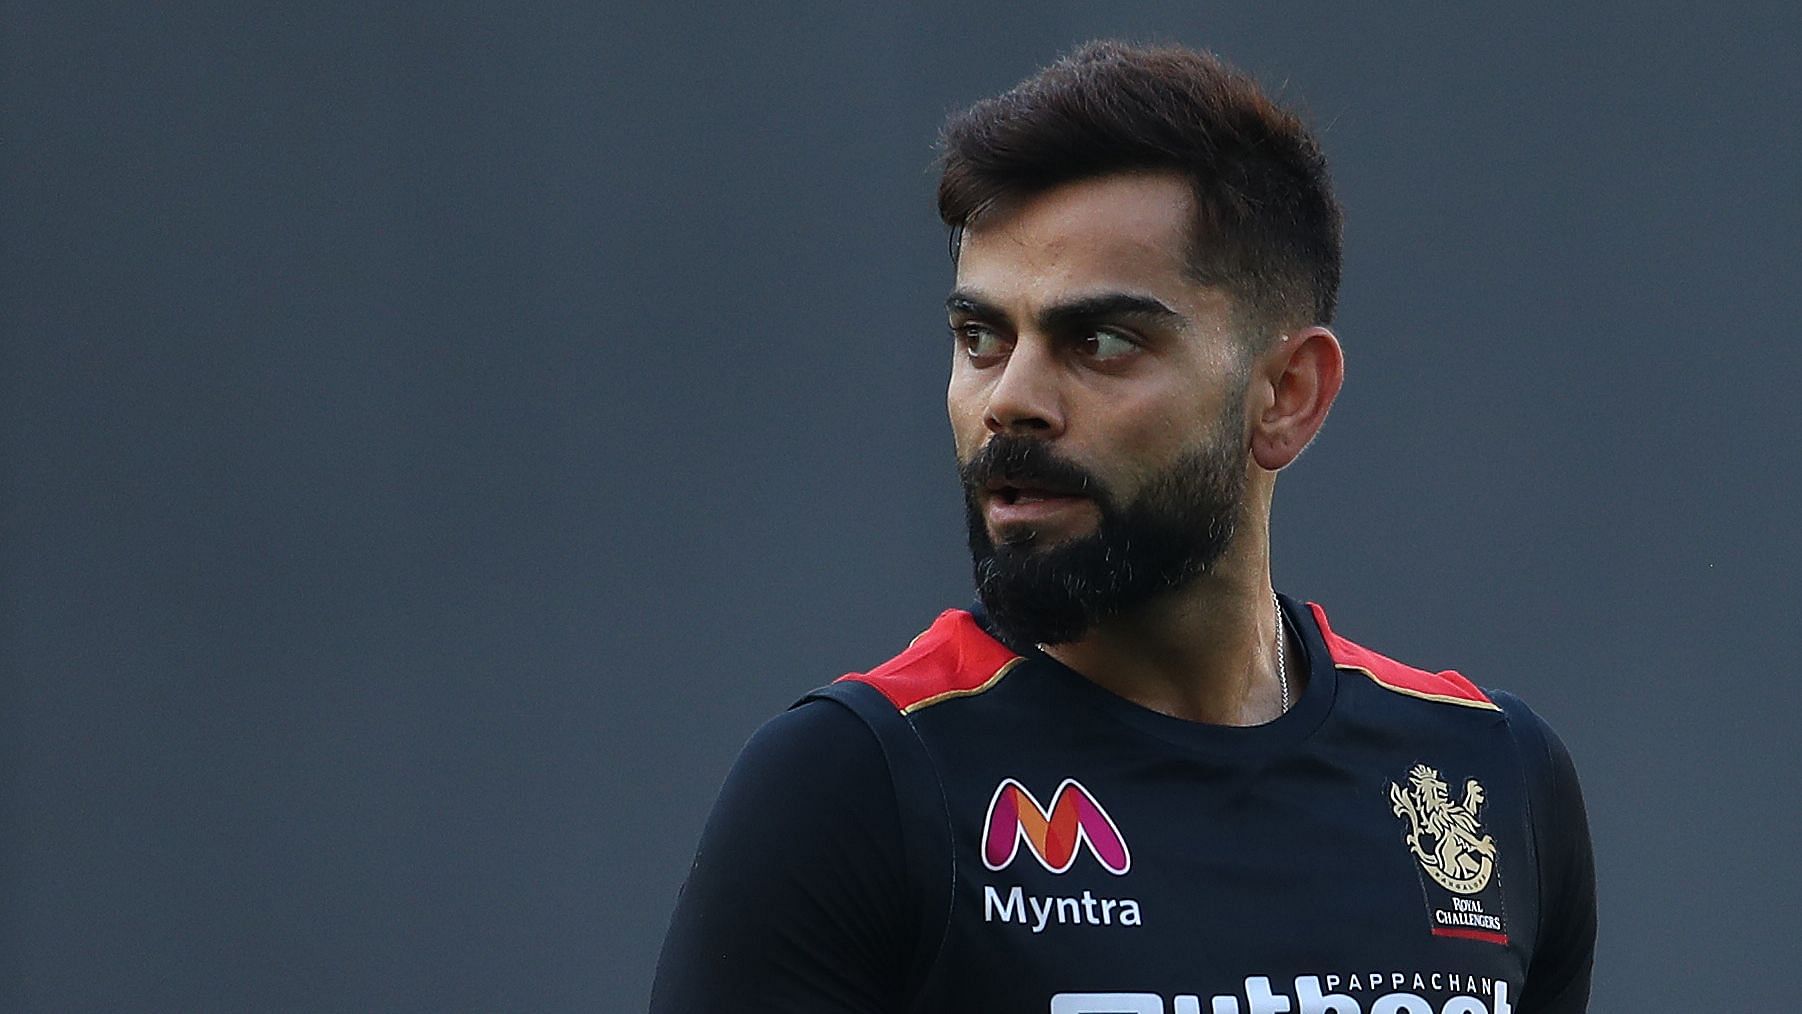 Virat Kohli is an all-time great player and will not struggle when he takes the field after a long COVID-19 induced hiatus feels former New Zealand all-rounder Scott Styris.